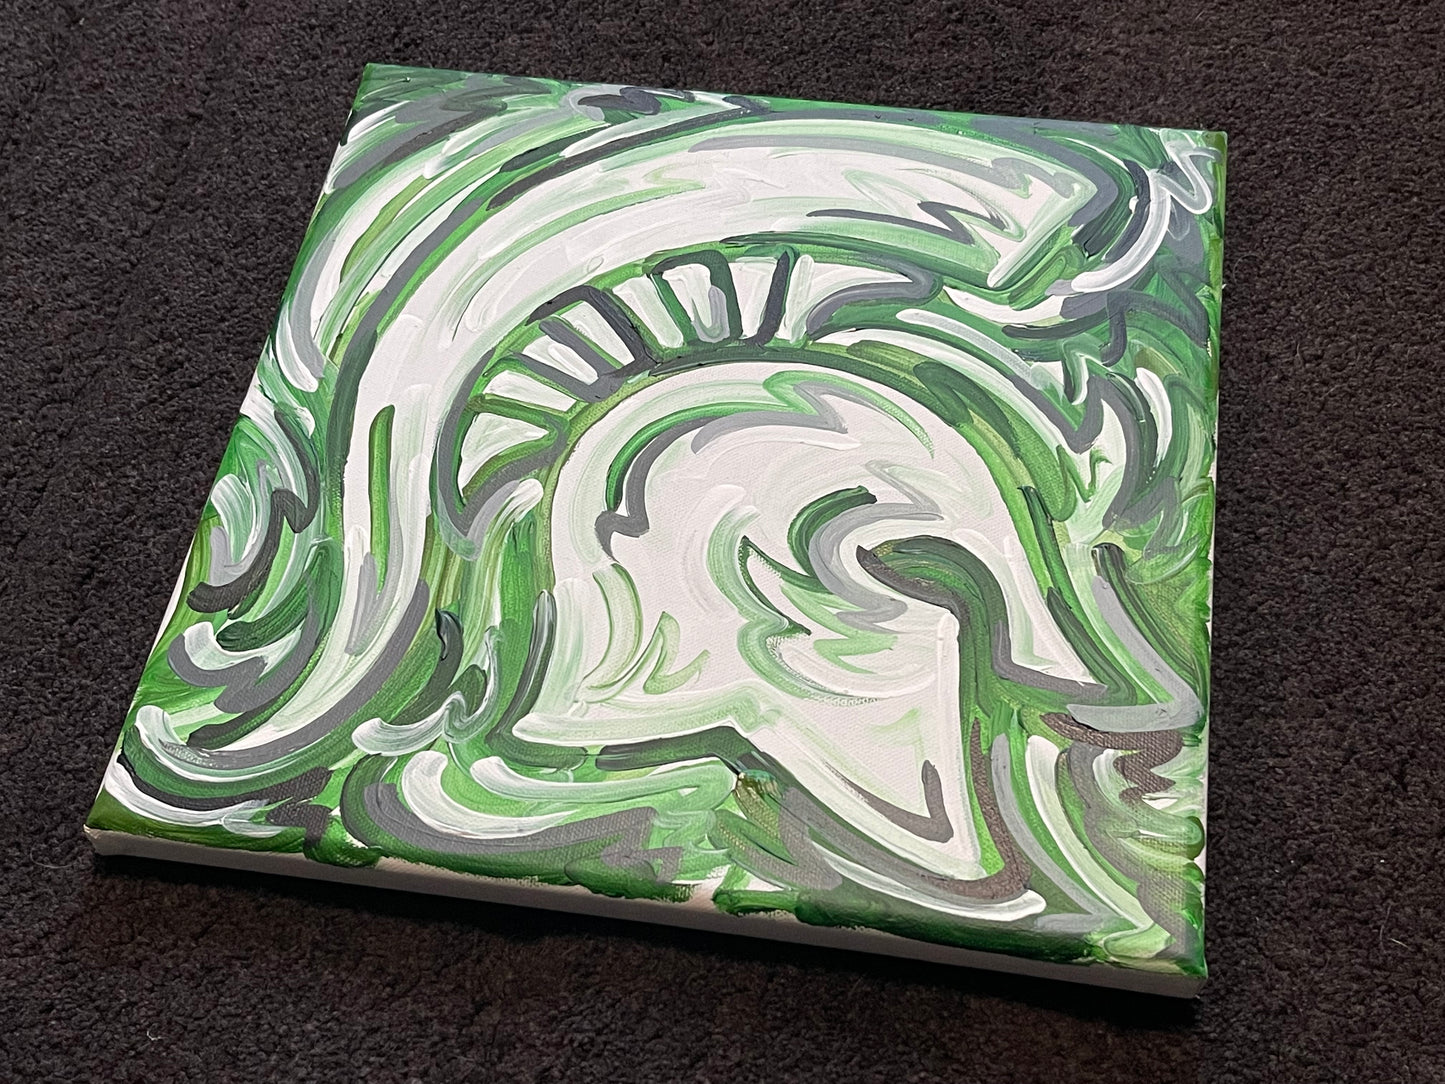 Michigan State University Painting by Justin Patten 12x12 (Finished Painting)